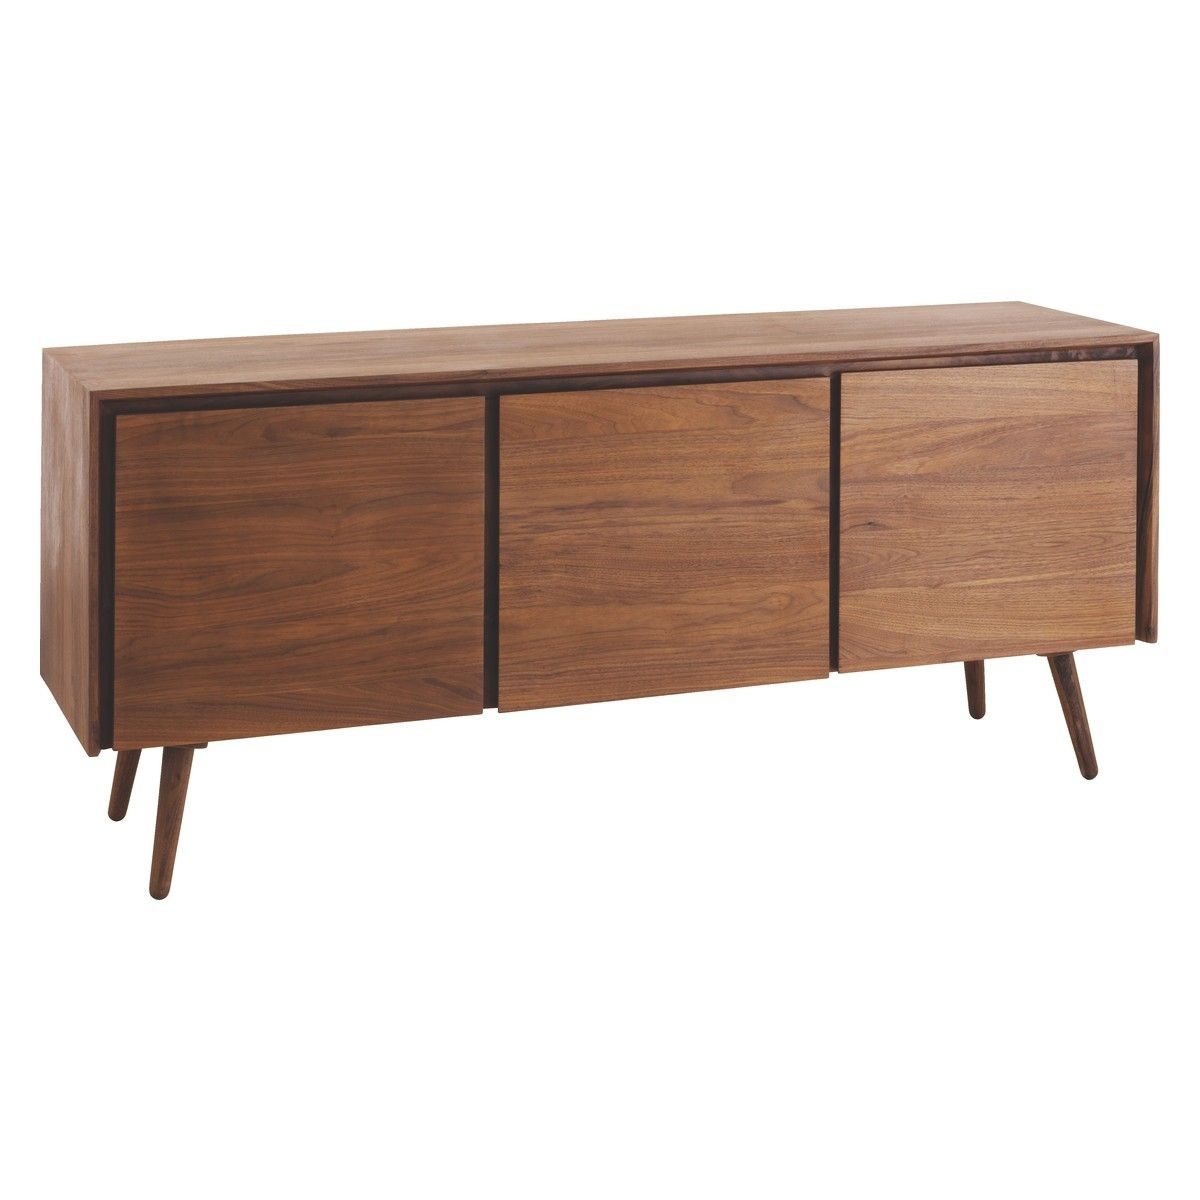 Vince Walnut 3 Door Mid Century Sideboard | Buy Now At Habitat Uk Throughout Walnut Finish Contempo Sideboards (Photo 14 of 30)